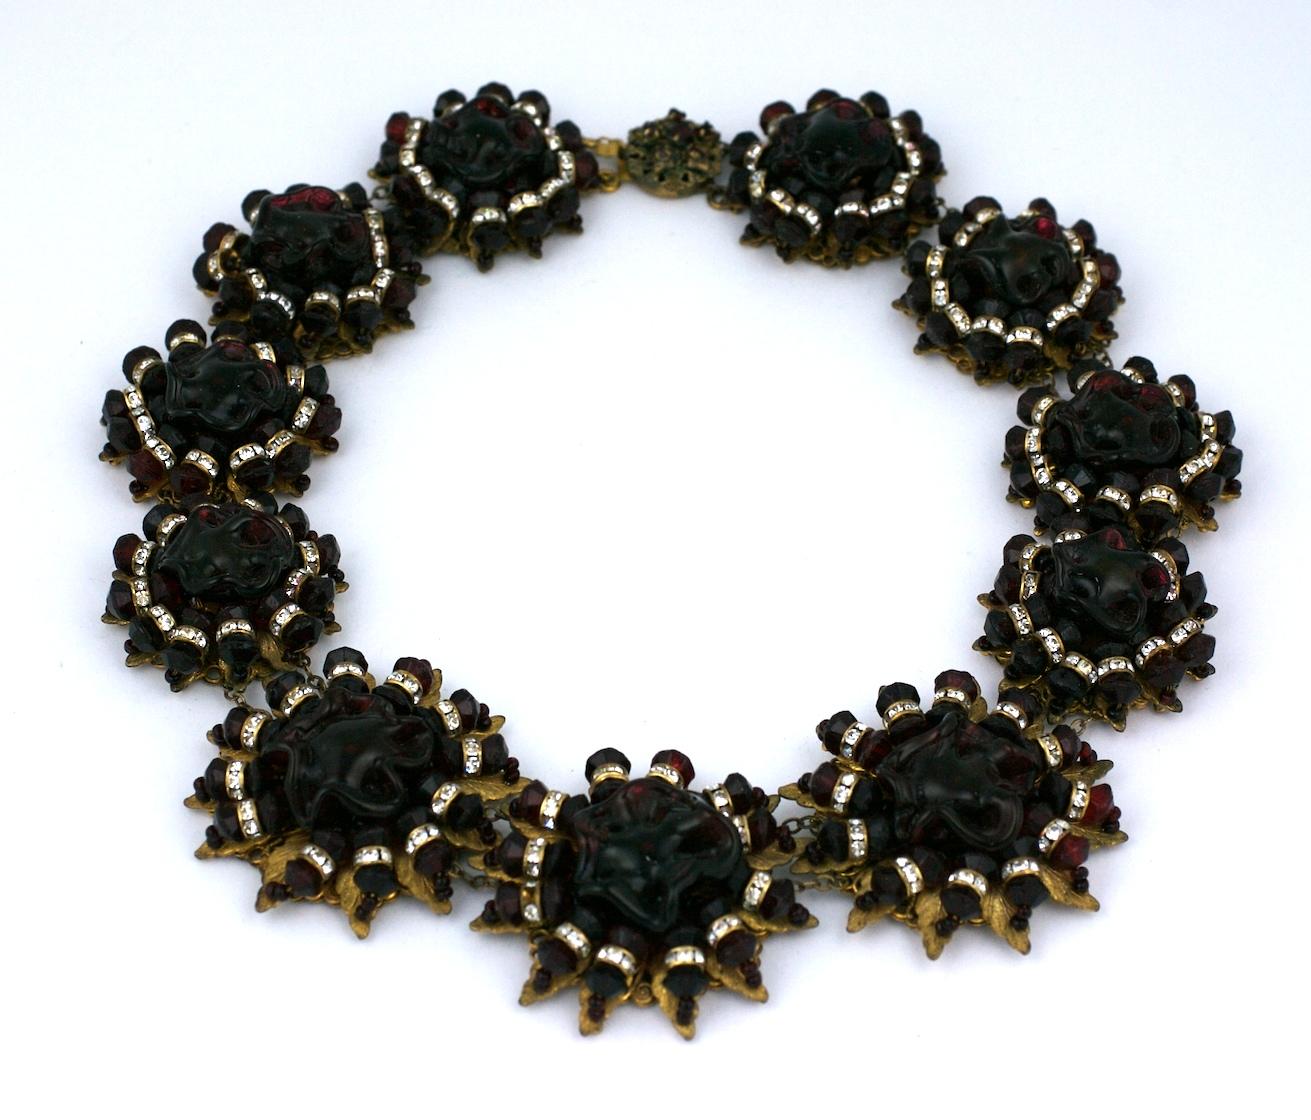 Exceptional Collector quality Miriam Haskell Deep Ruby and Pave Rondel Collar composed of graduated floriform stations with hand made pate de verre flower bead centers embroidered in sunburst patterns with the of additional ruby beads and pave